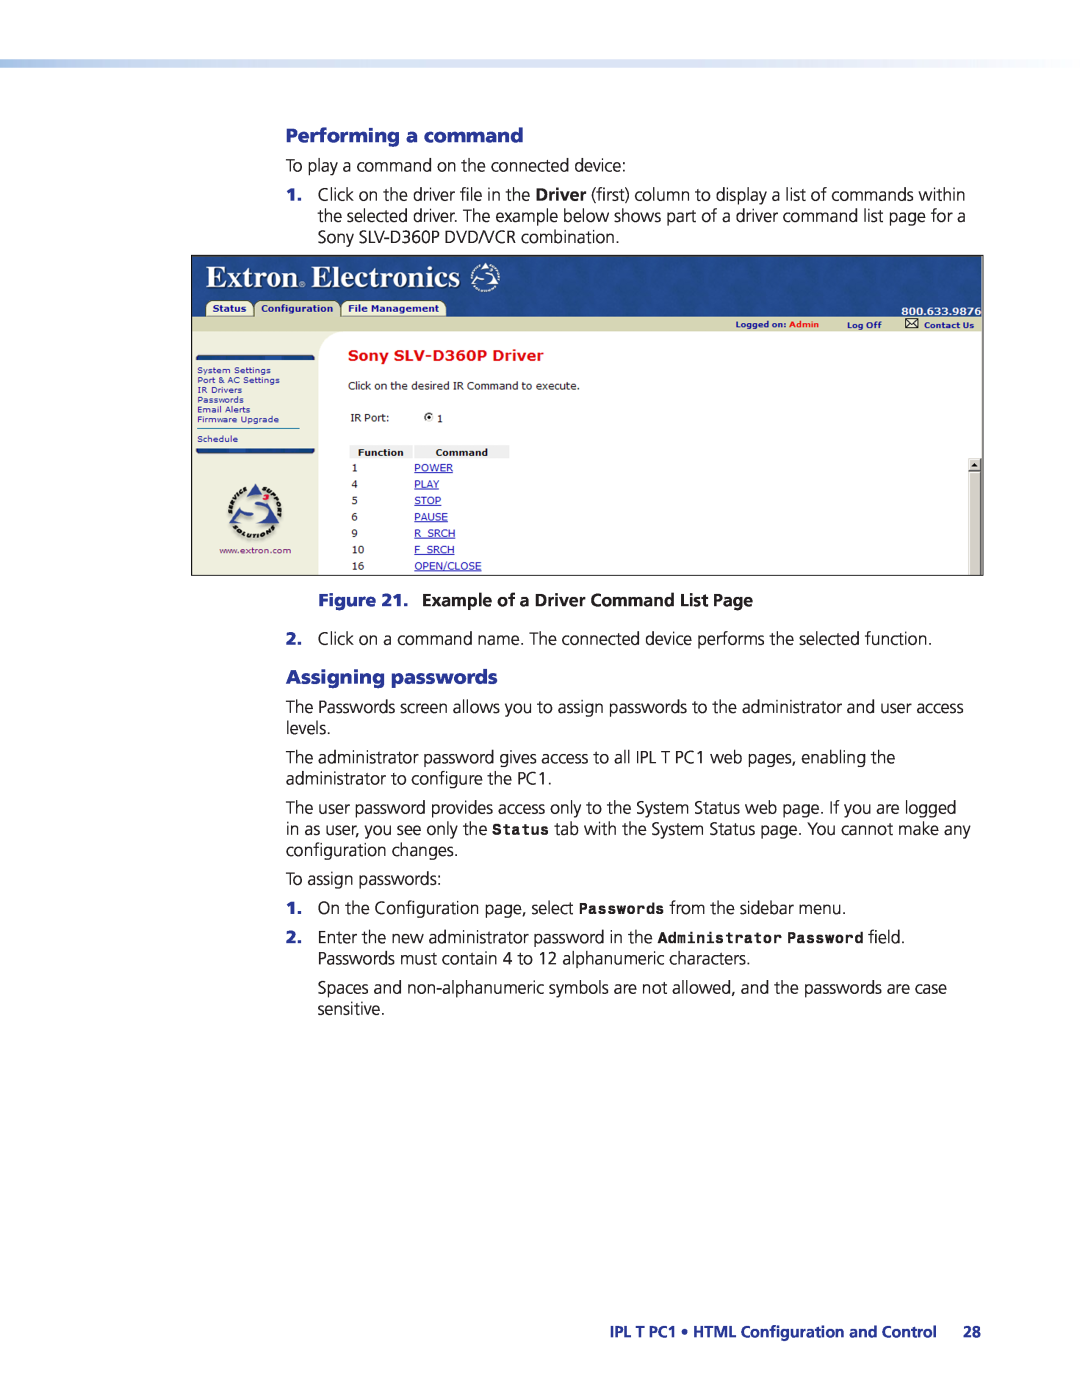 Extron electronic IPL T PC1i manual Performing a command, Assigning passwords, Example of a Driver Command List Page 